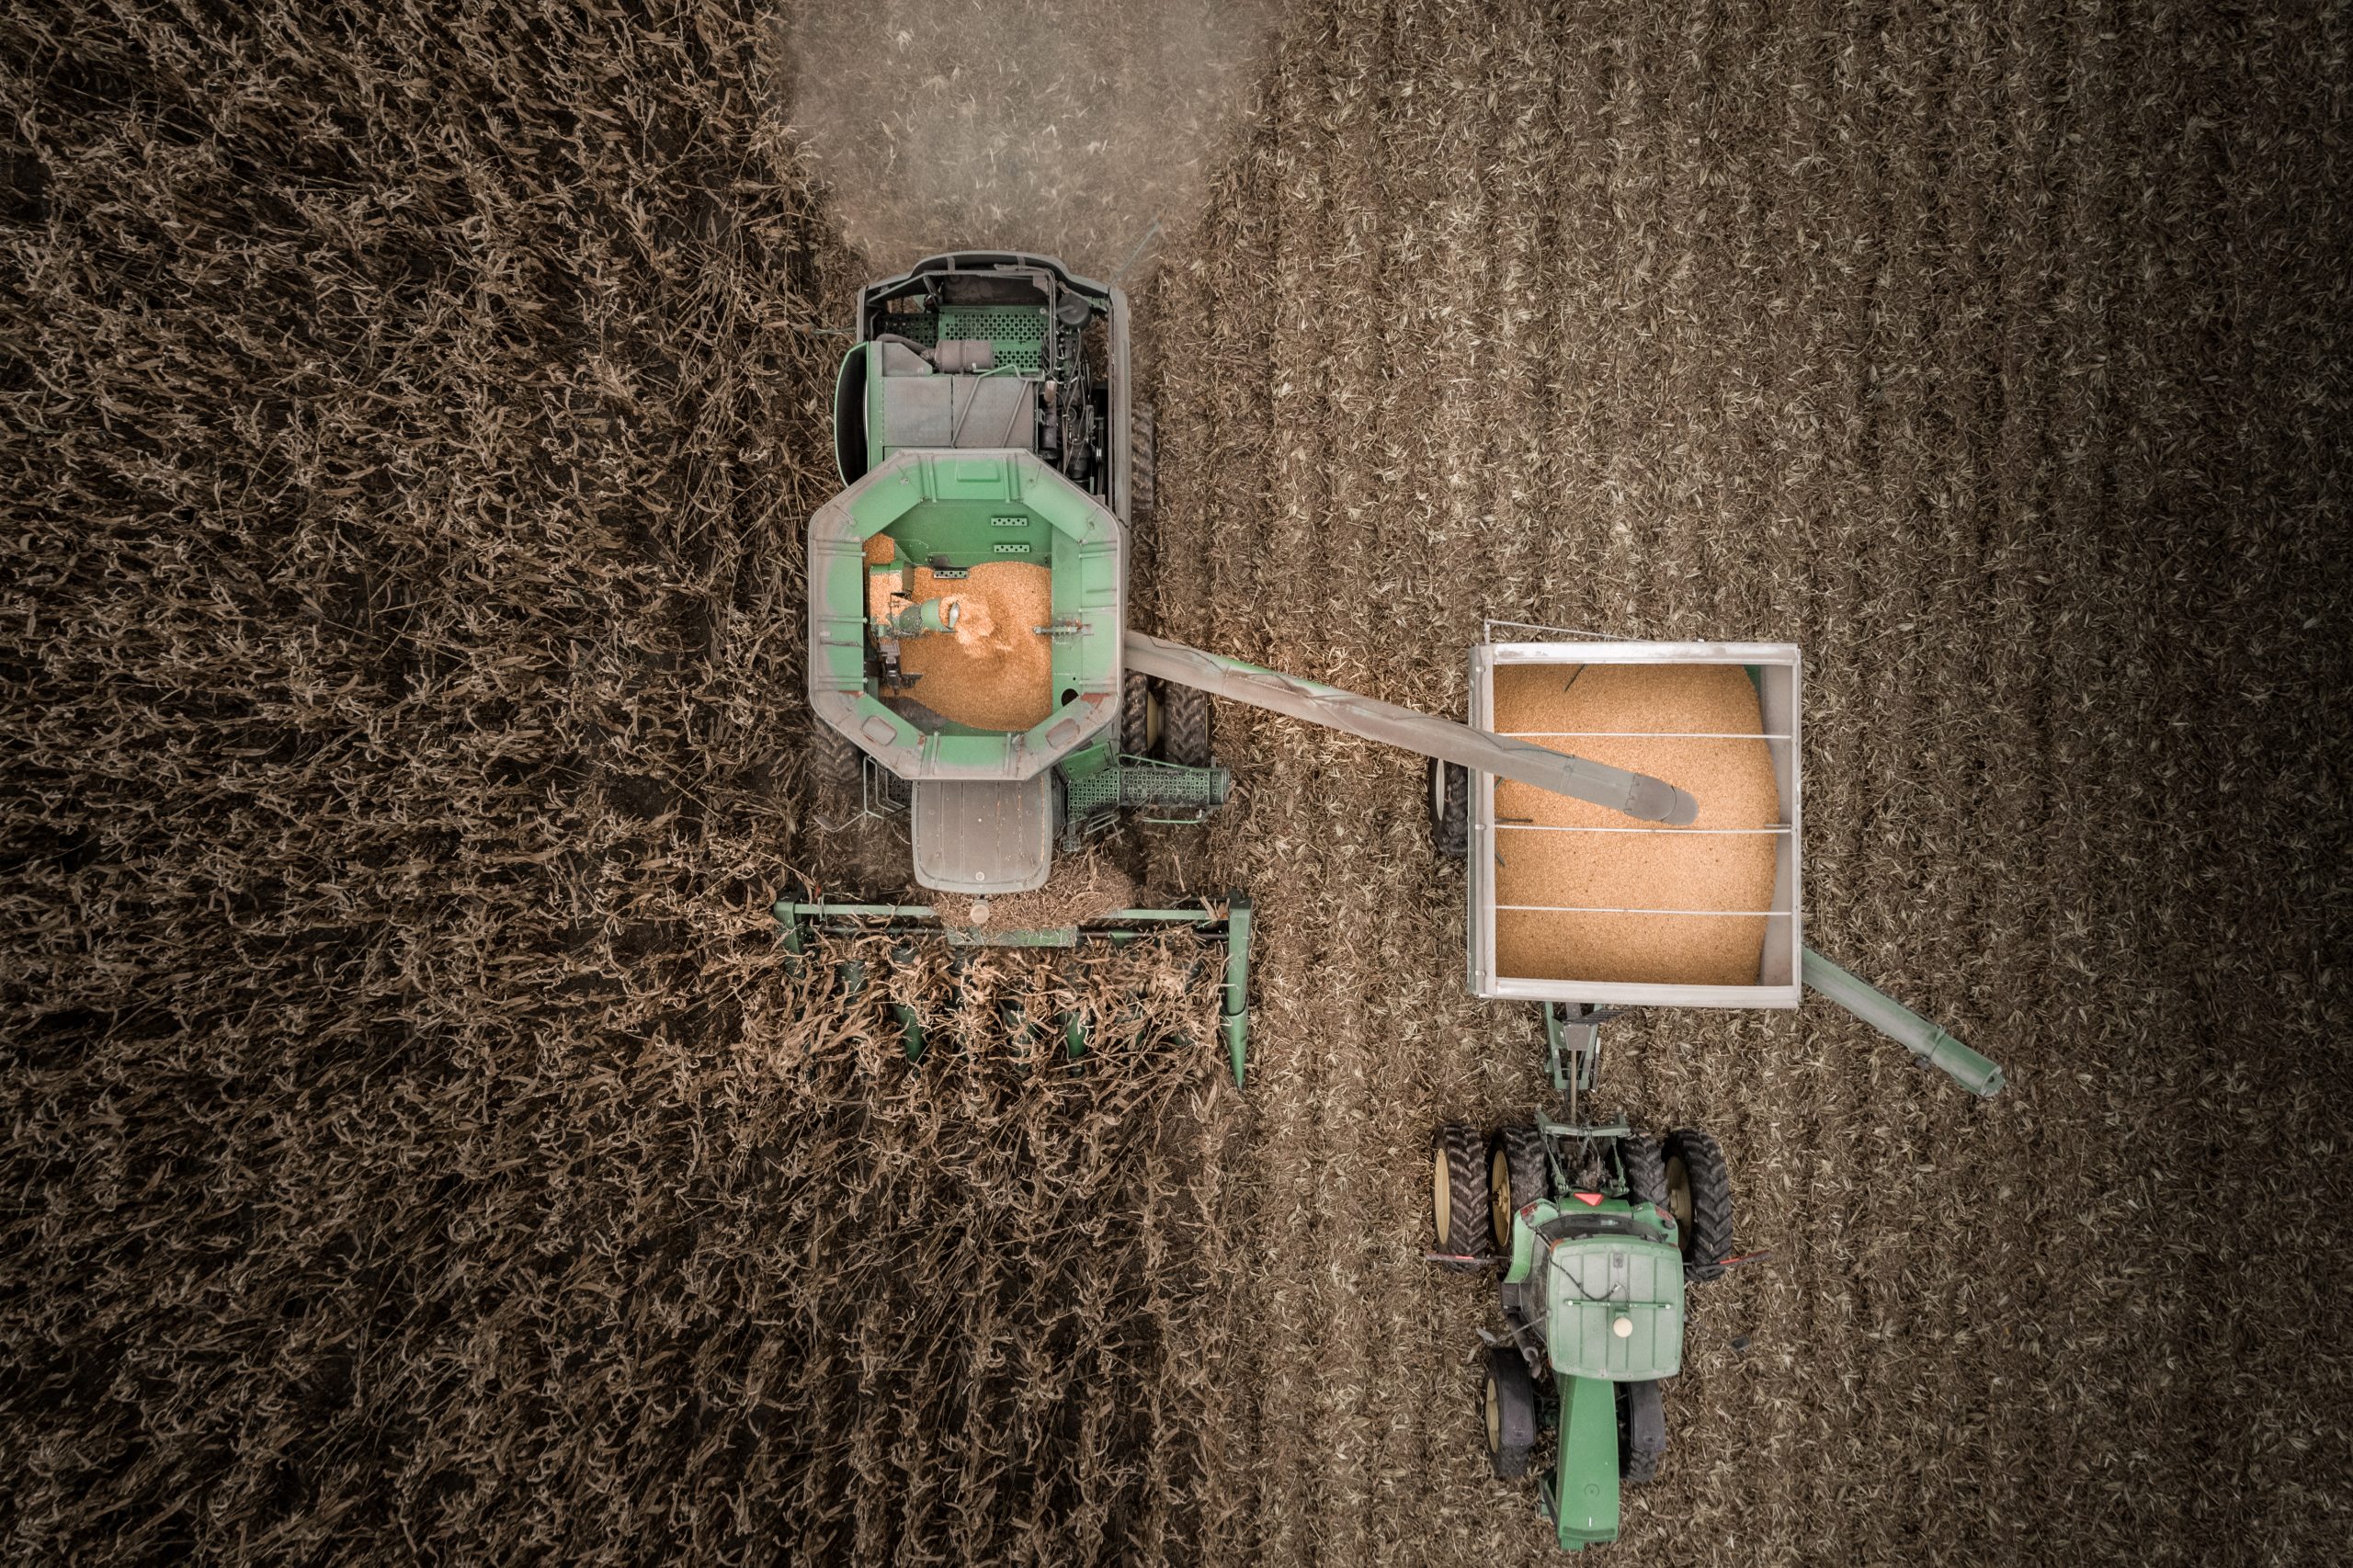 Looking down on the combine and tractor moving through the corn field using the drone to look down.